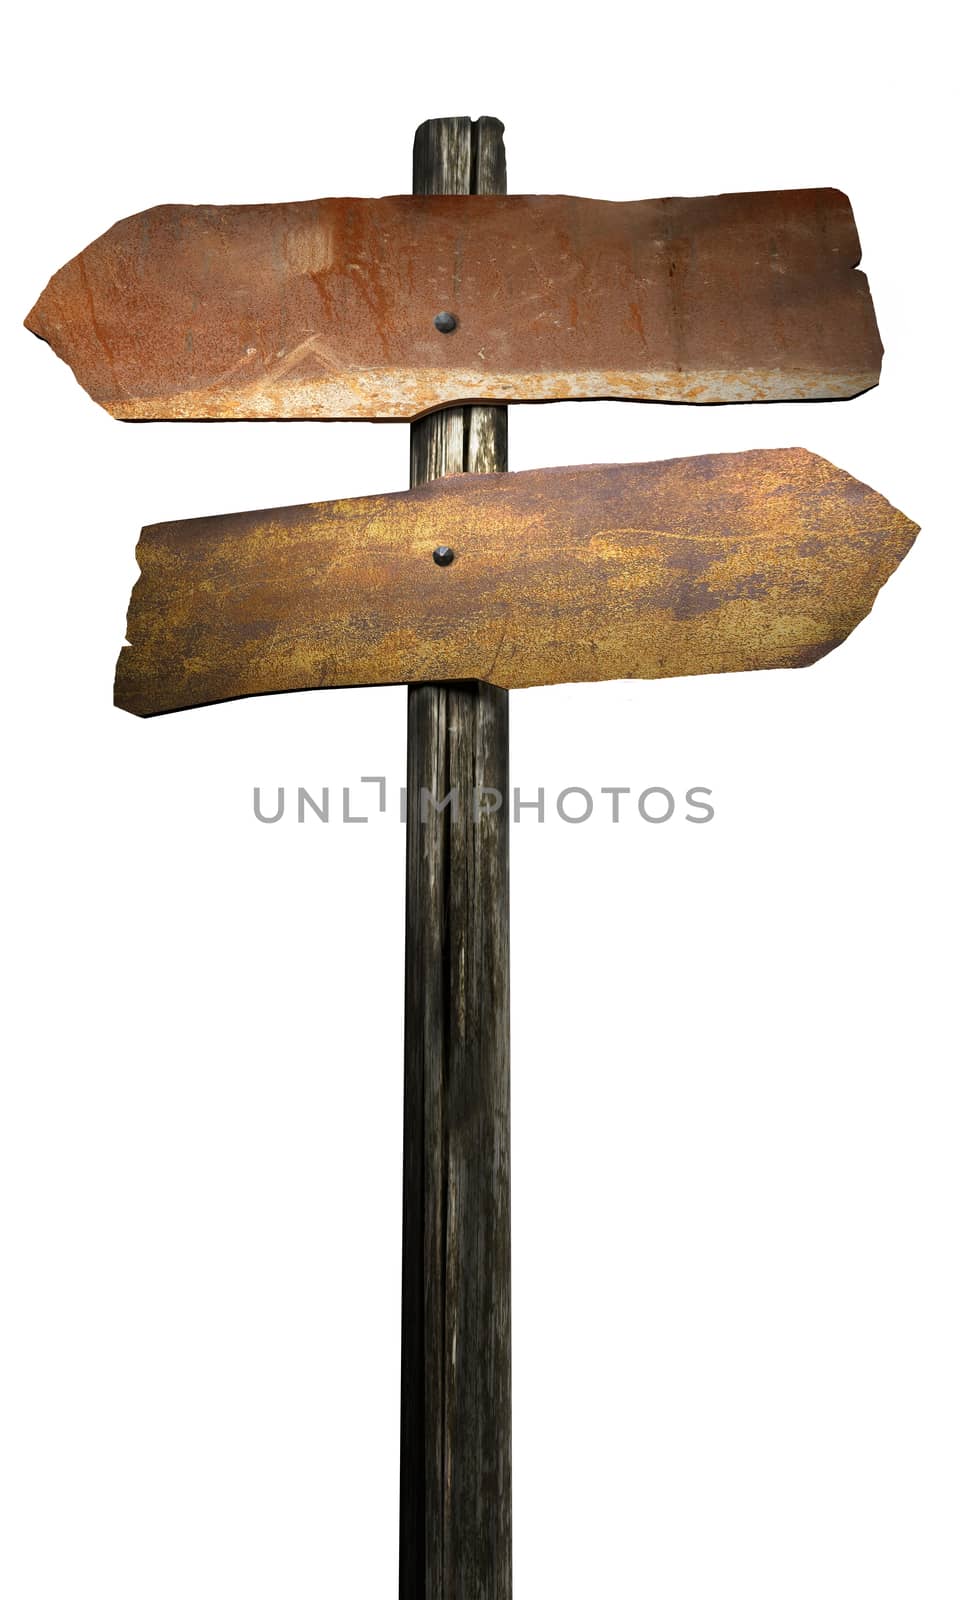 
Blank old directional road metal  sign post over piese of wood